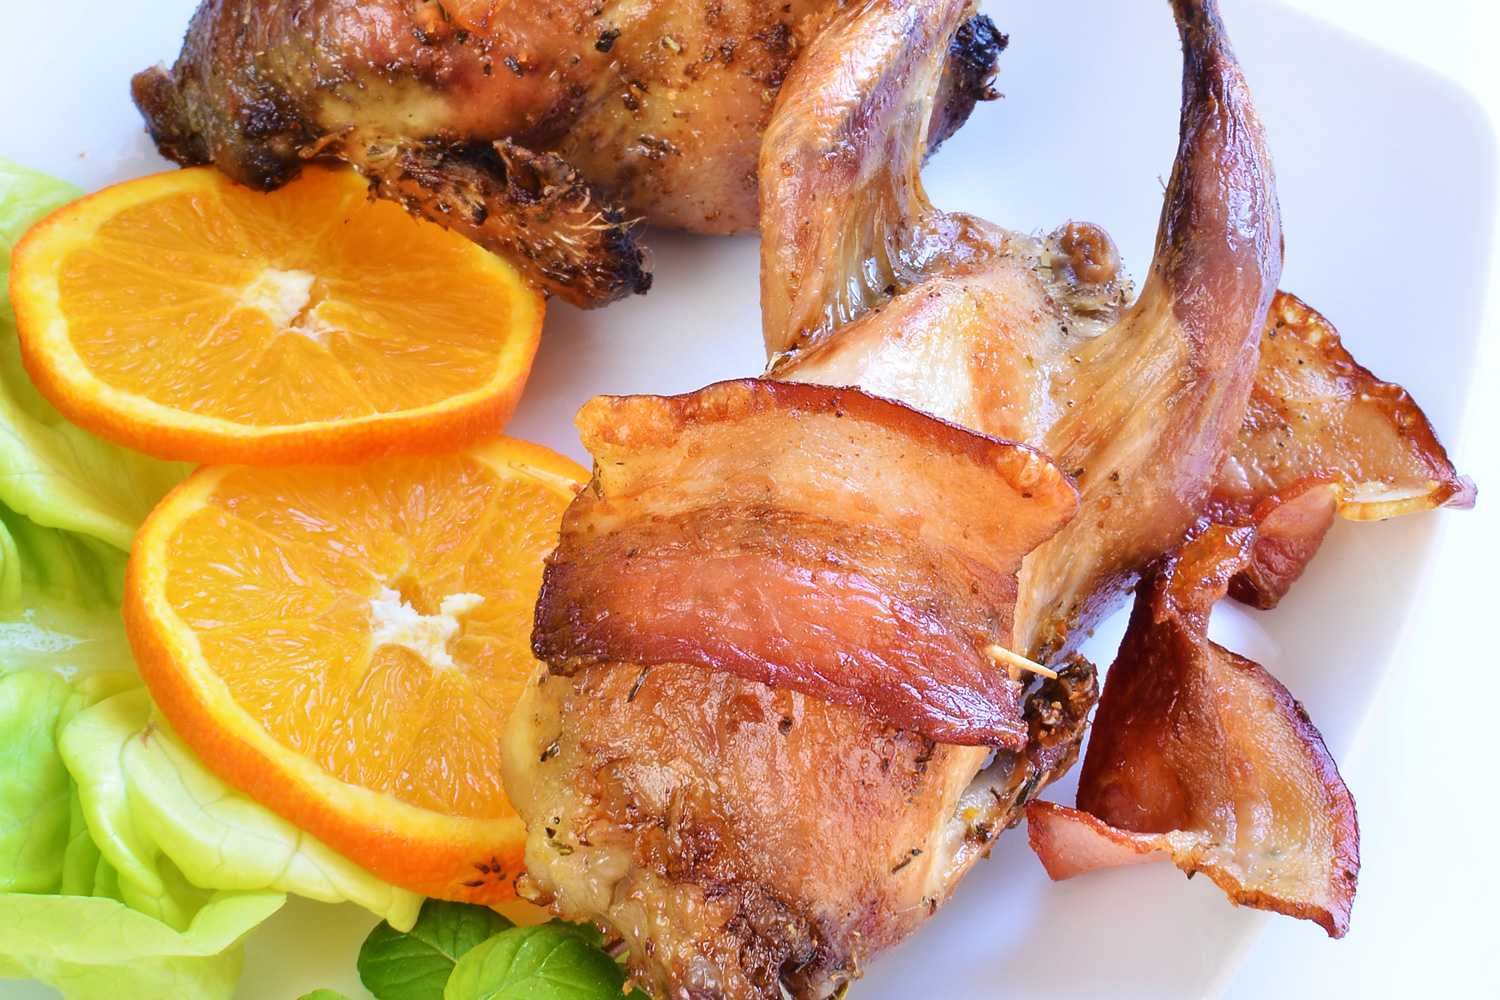 Roasted quail wrapped with bacon with orange slices and lettuce on side